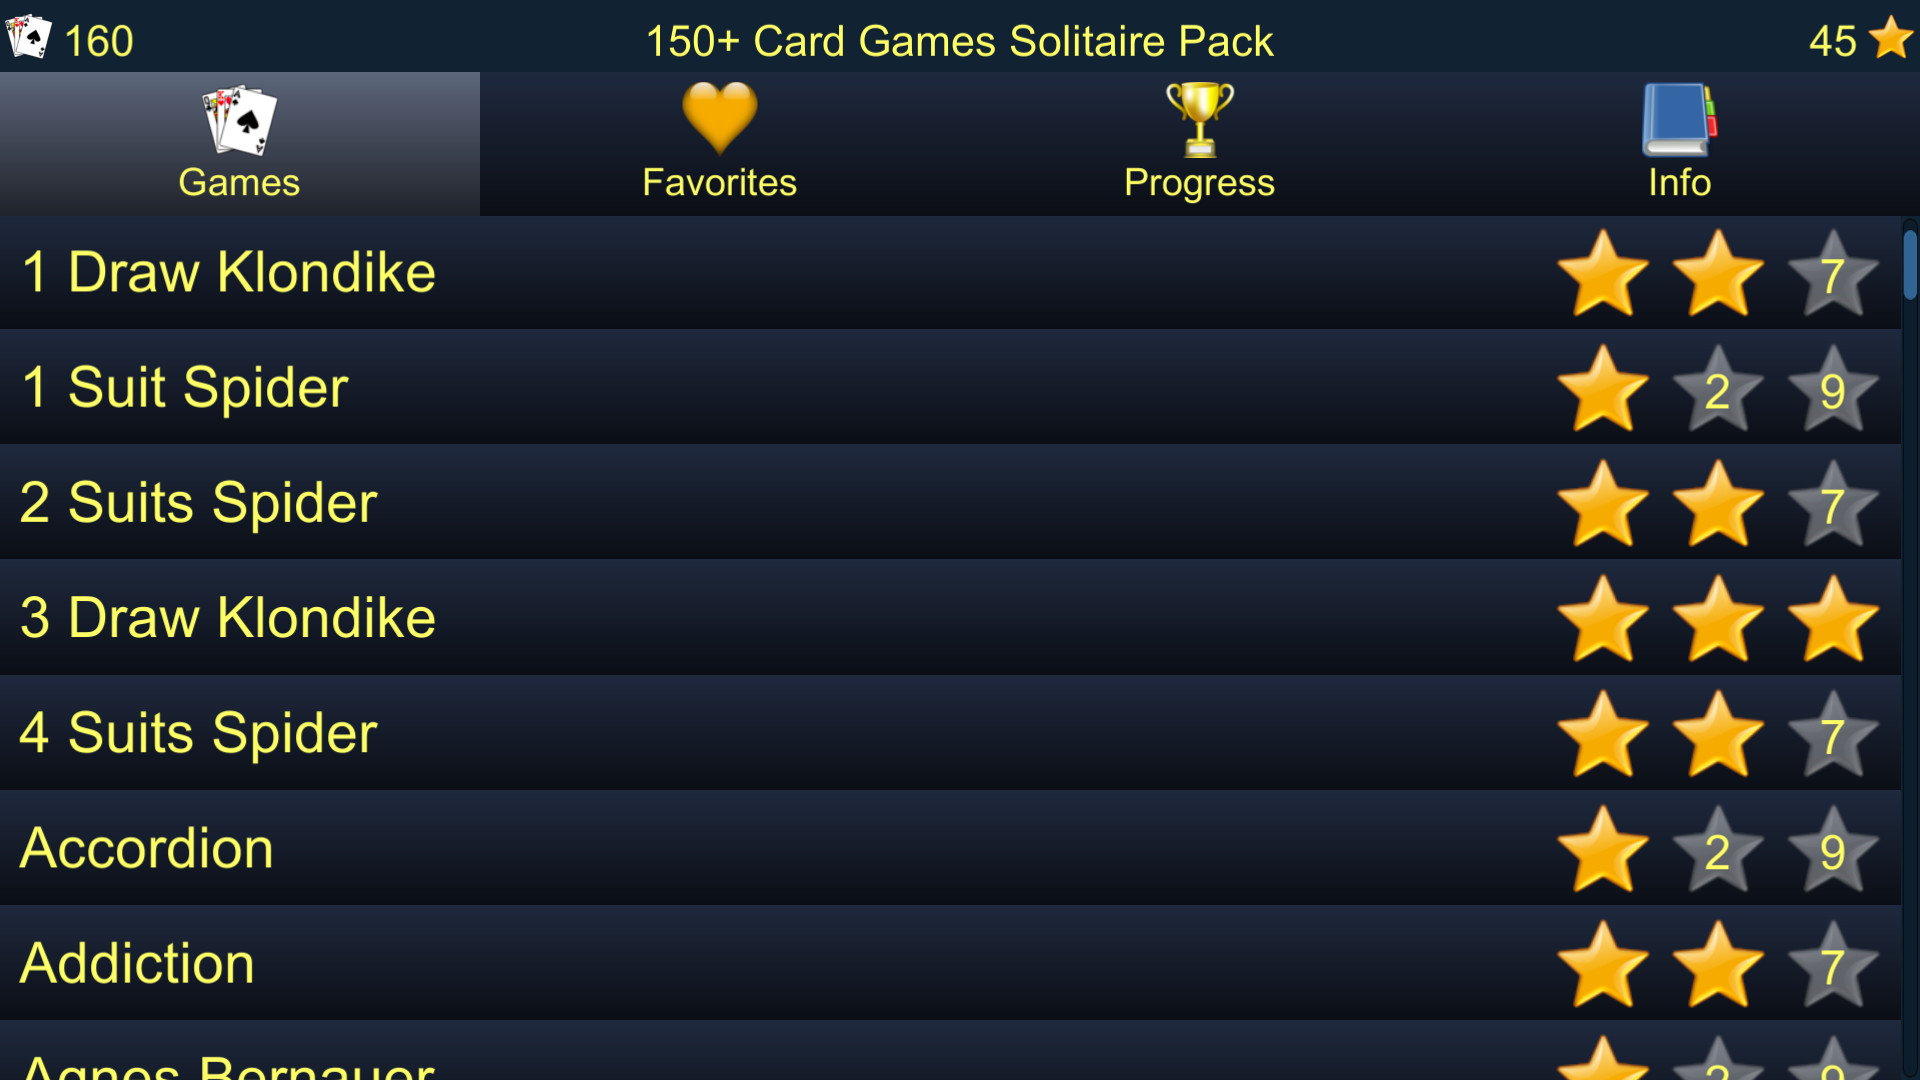 150+ Card Games Solitaire Pack Steam CD Key $0.63